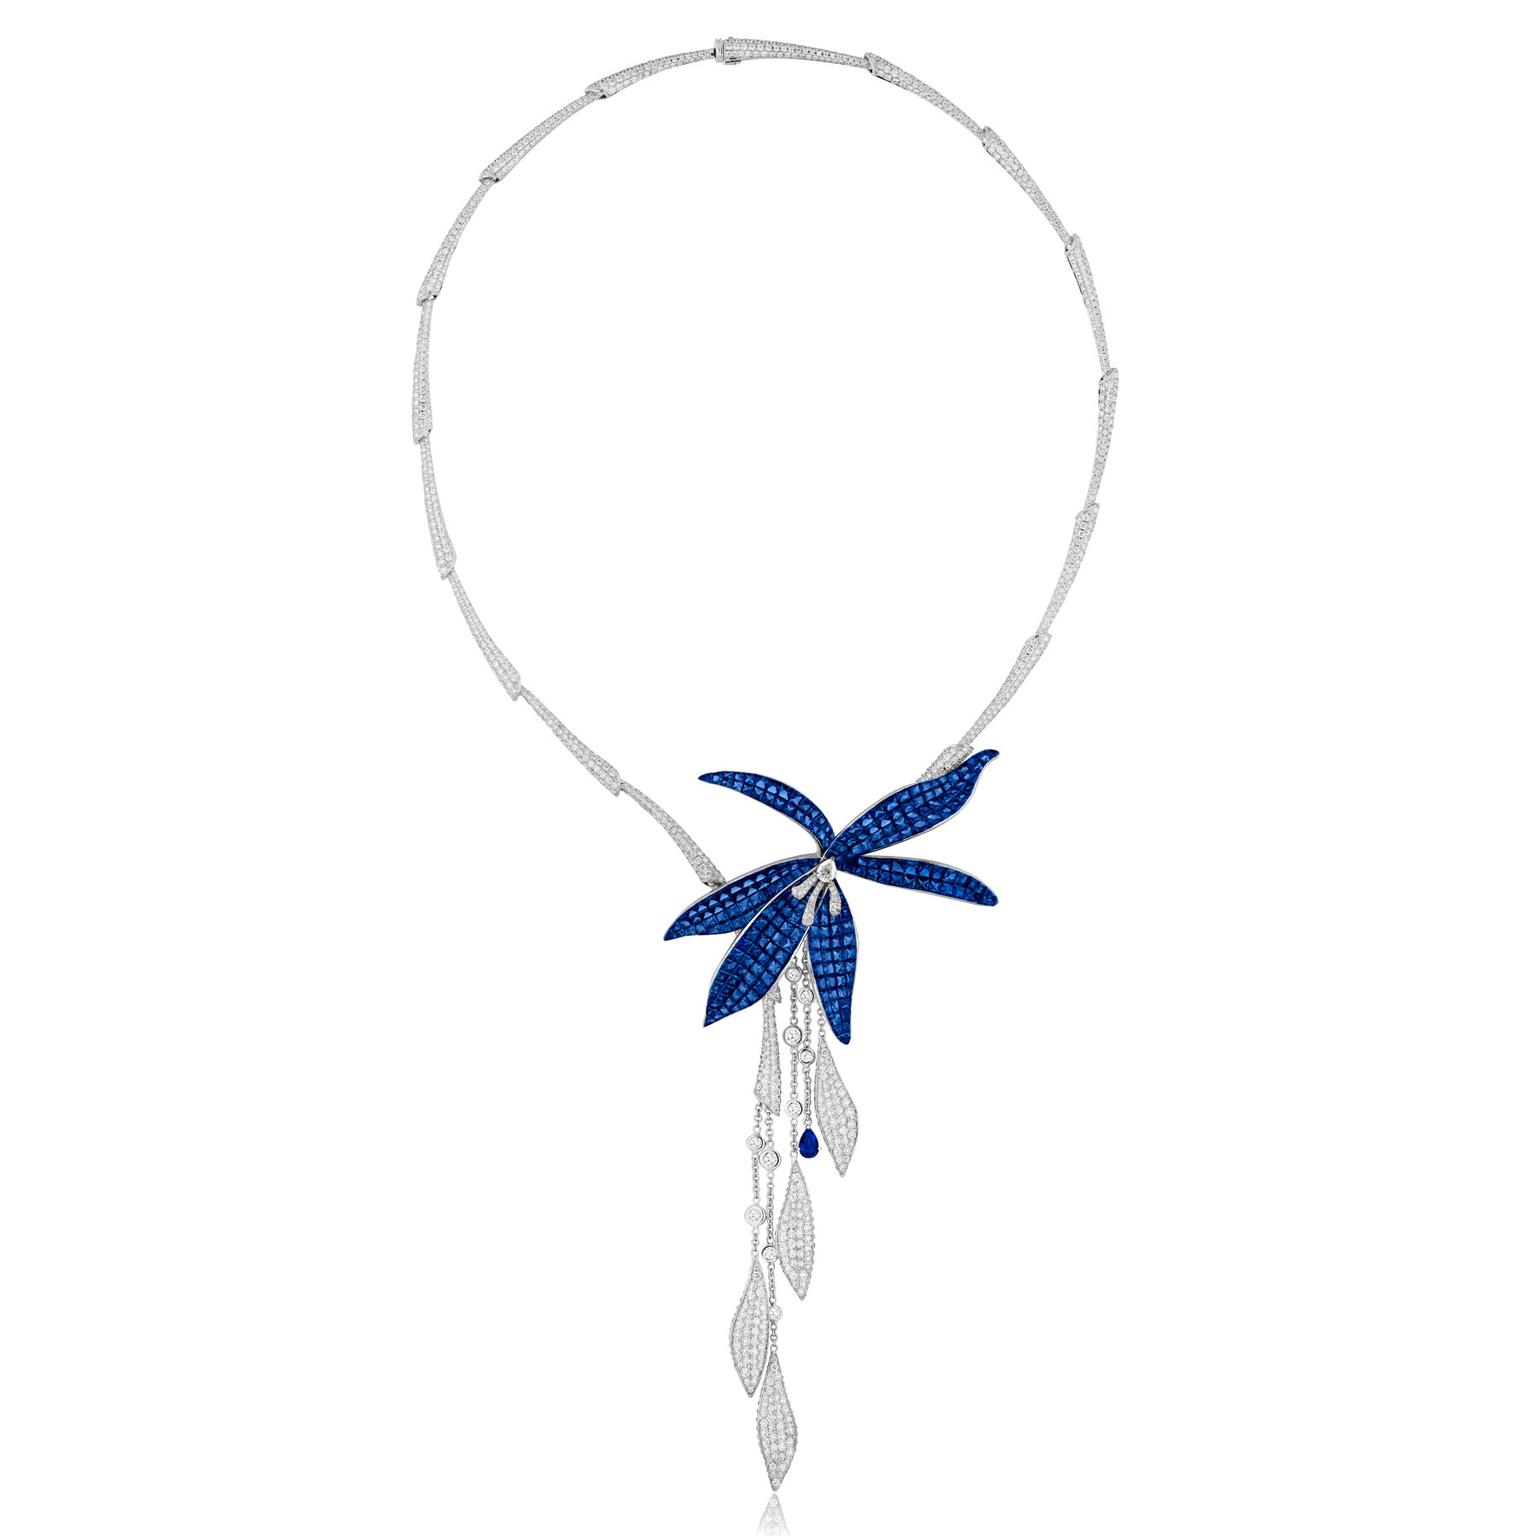 Stenzhorn Noble Ones wild orchid sapphire high jewellery necklace